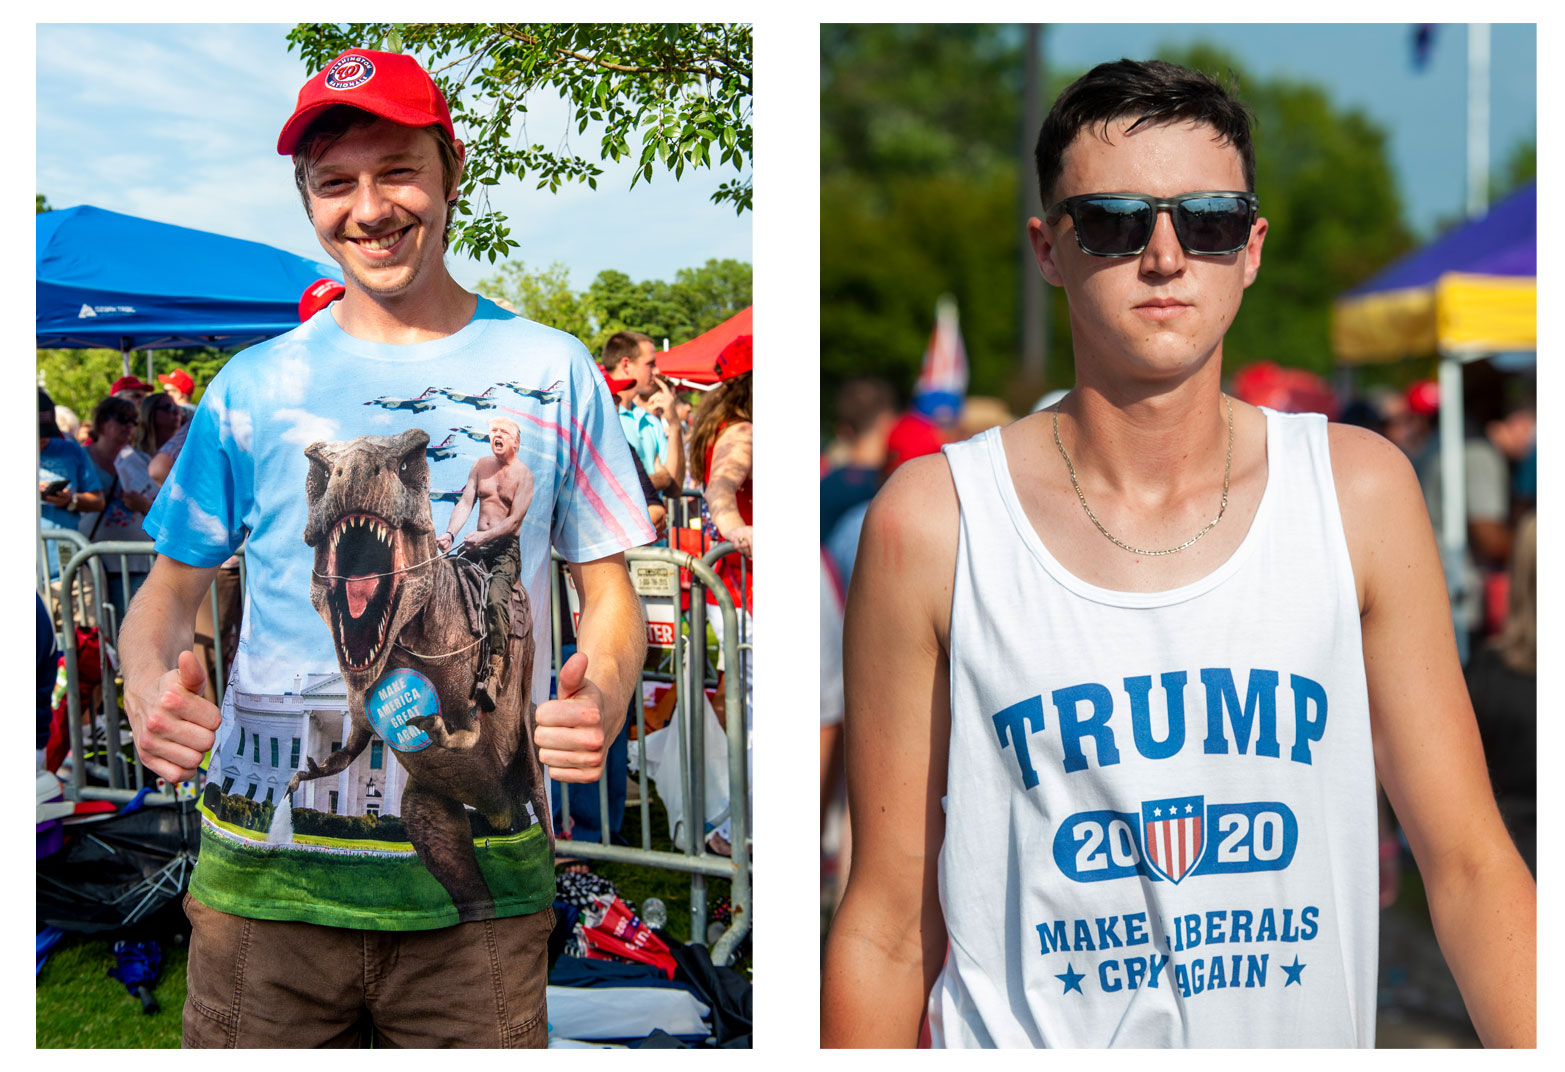 Raleigh editorial photography Bryan Regan Trump supporters campaign 2020